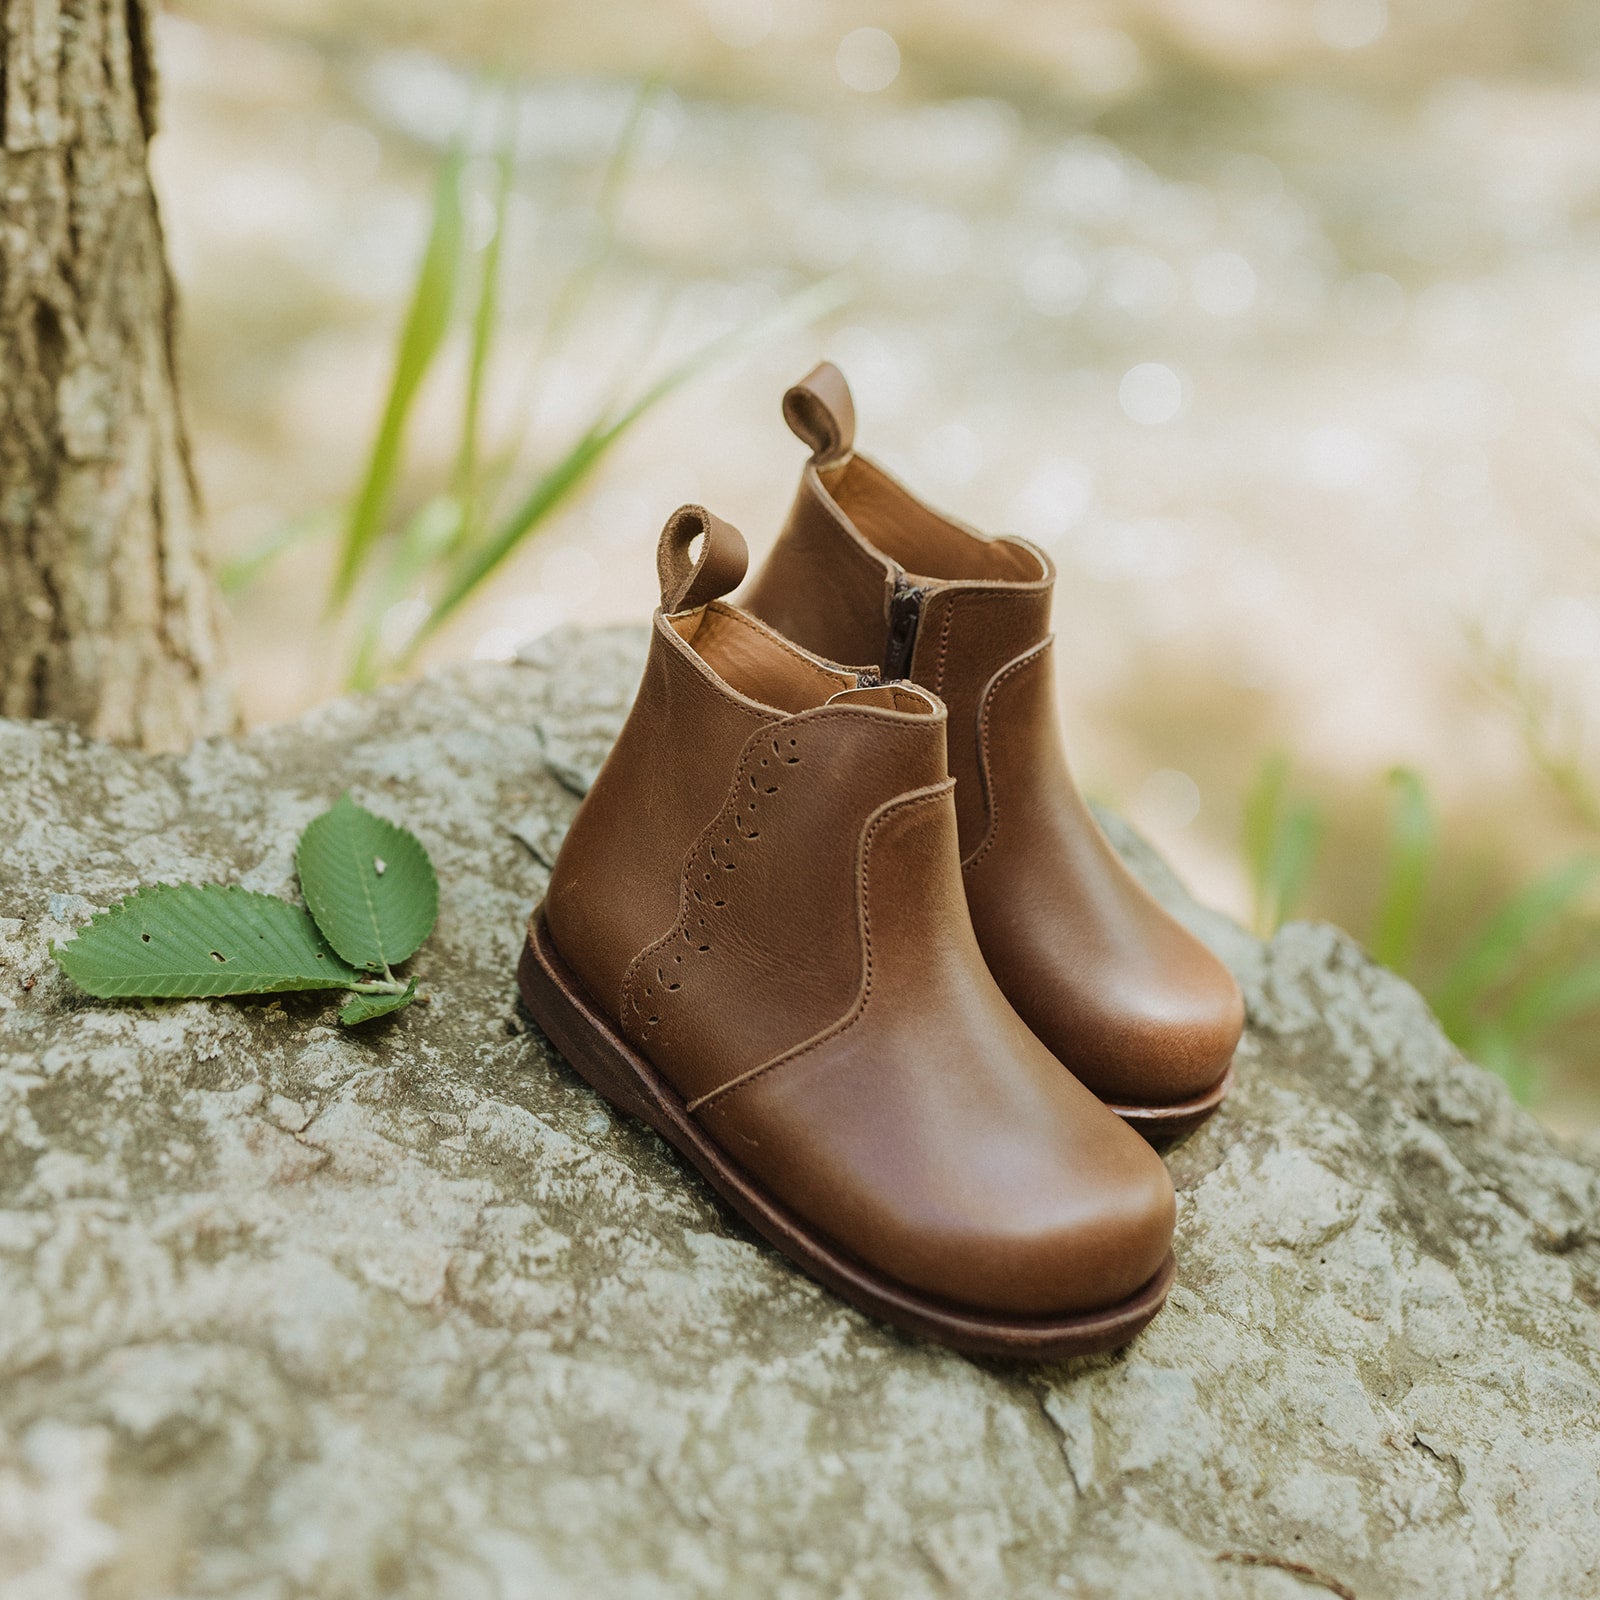 Adelisa &amp; Co dark brown leather Ophelia boots for girls with beautiful floral detailing